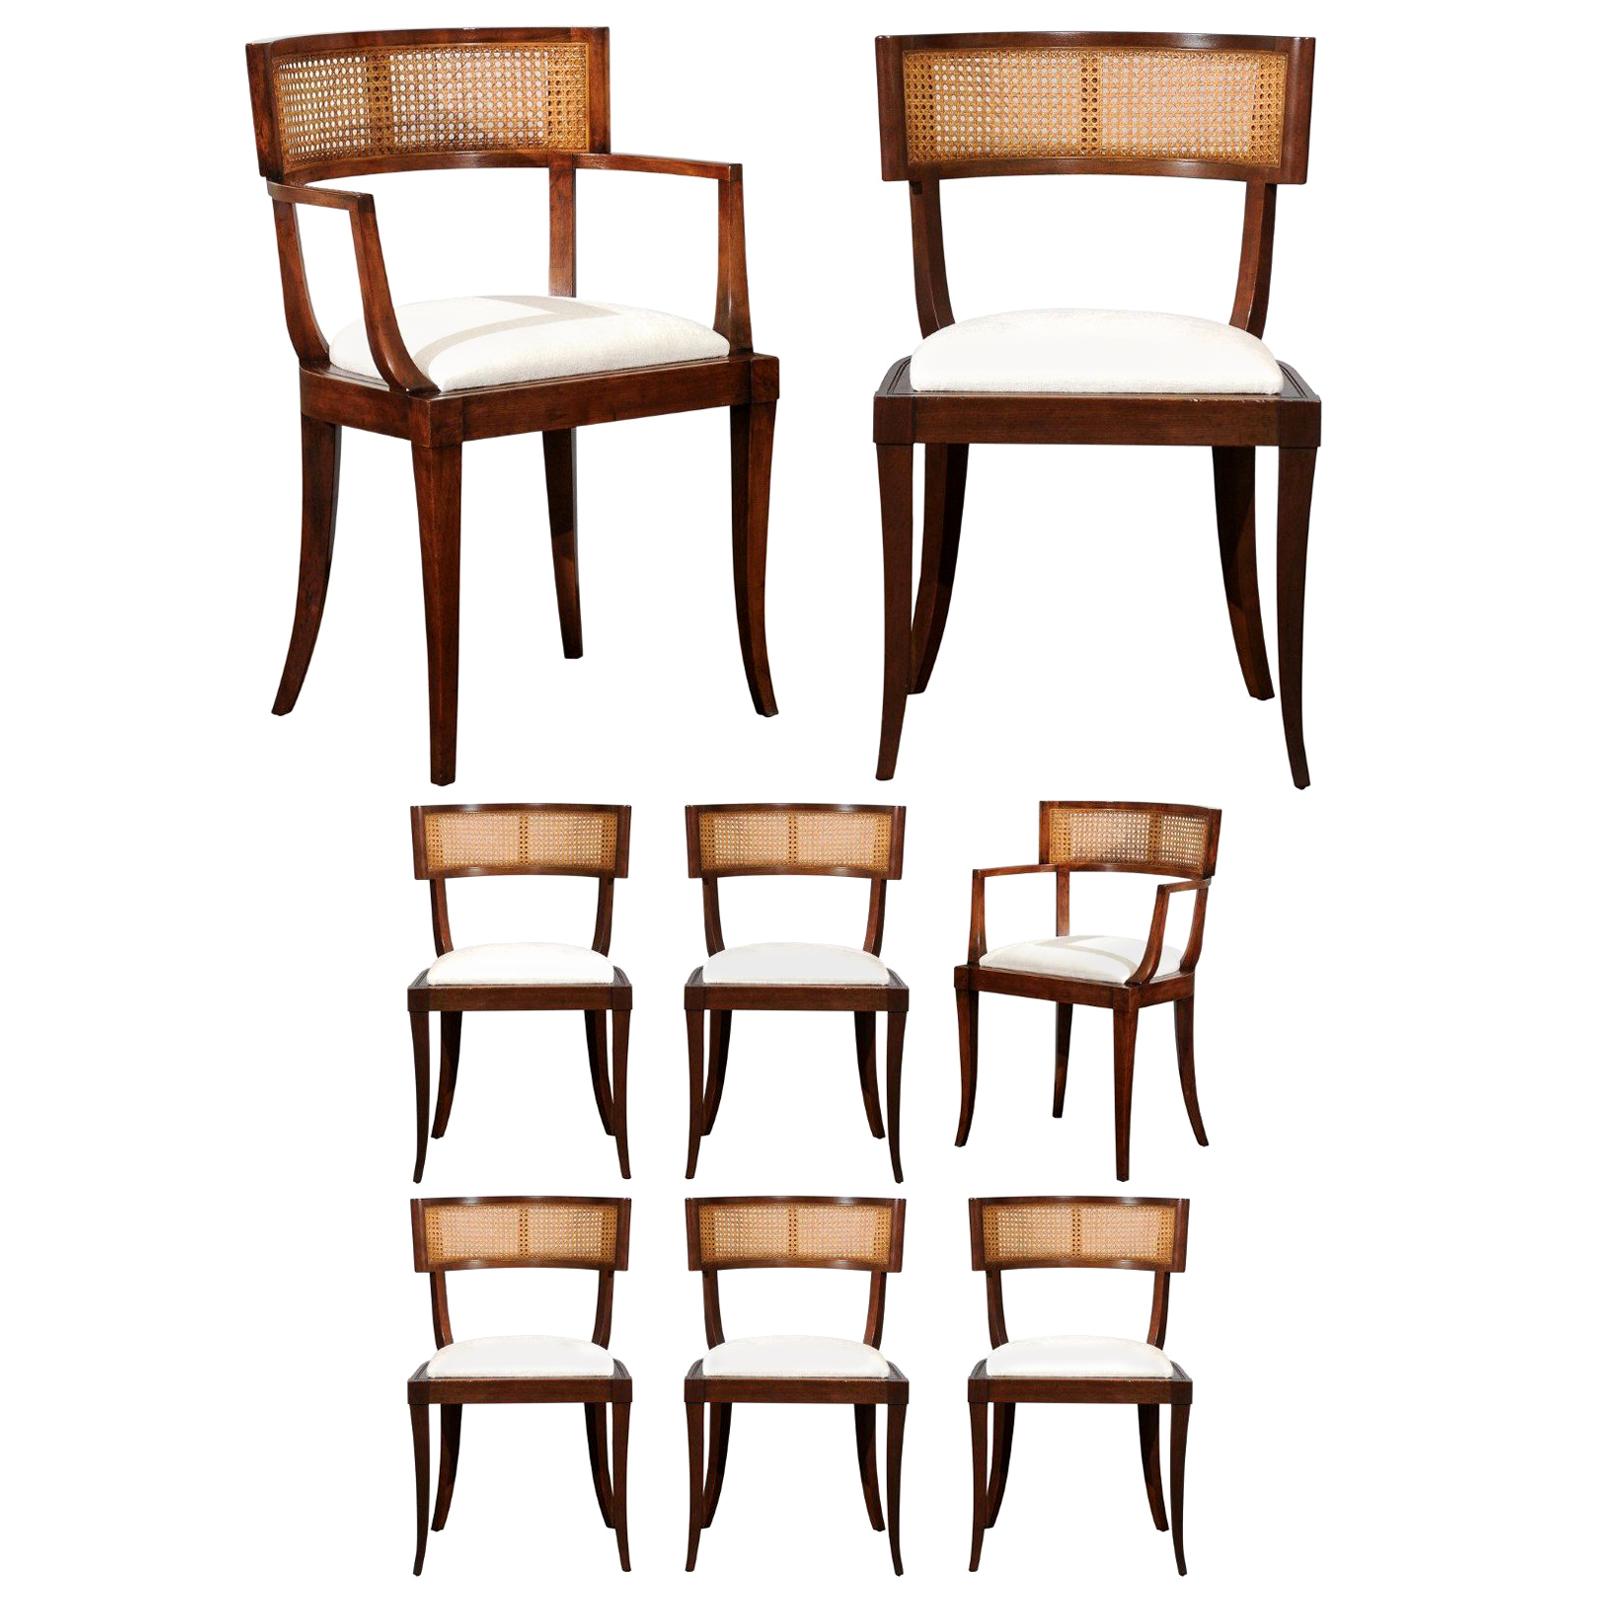 Exquisite Set of Eight Klismos Cane Dining Chairs by Baker, circa 1958